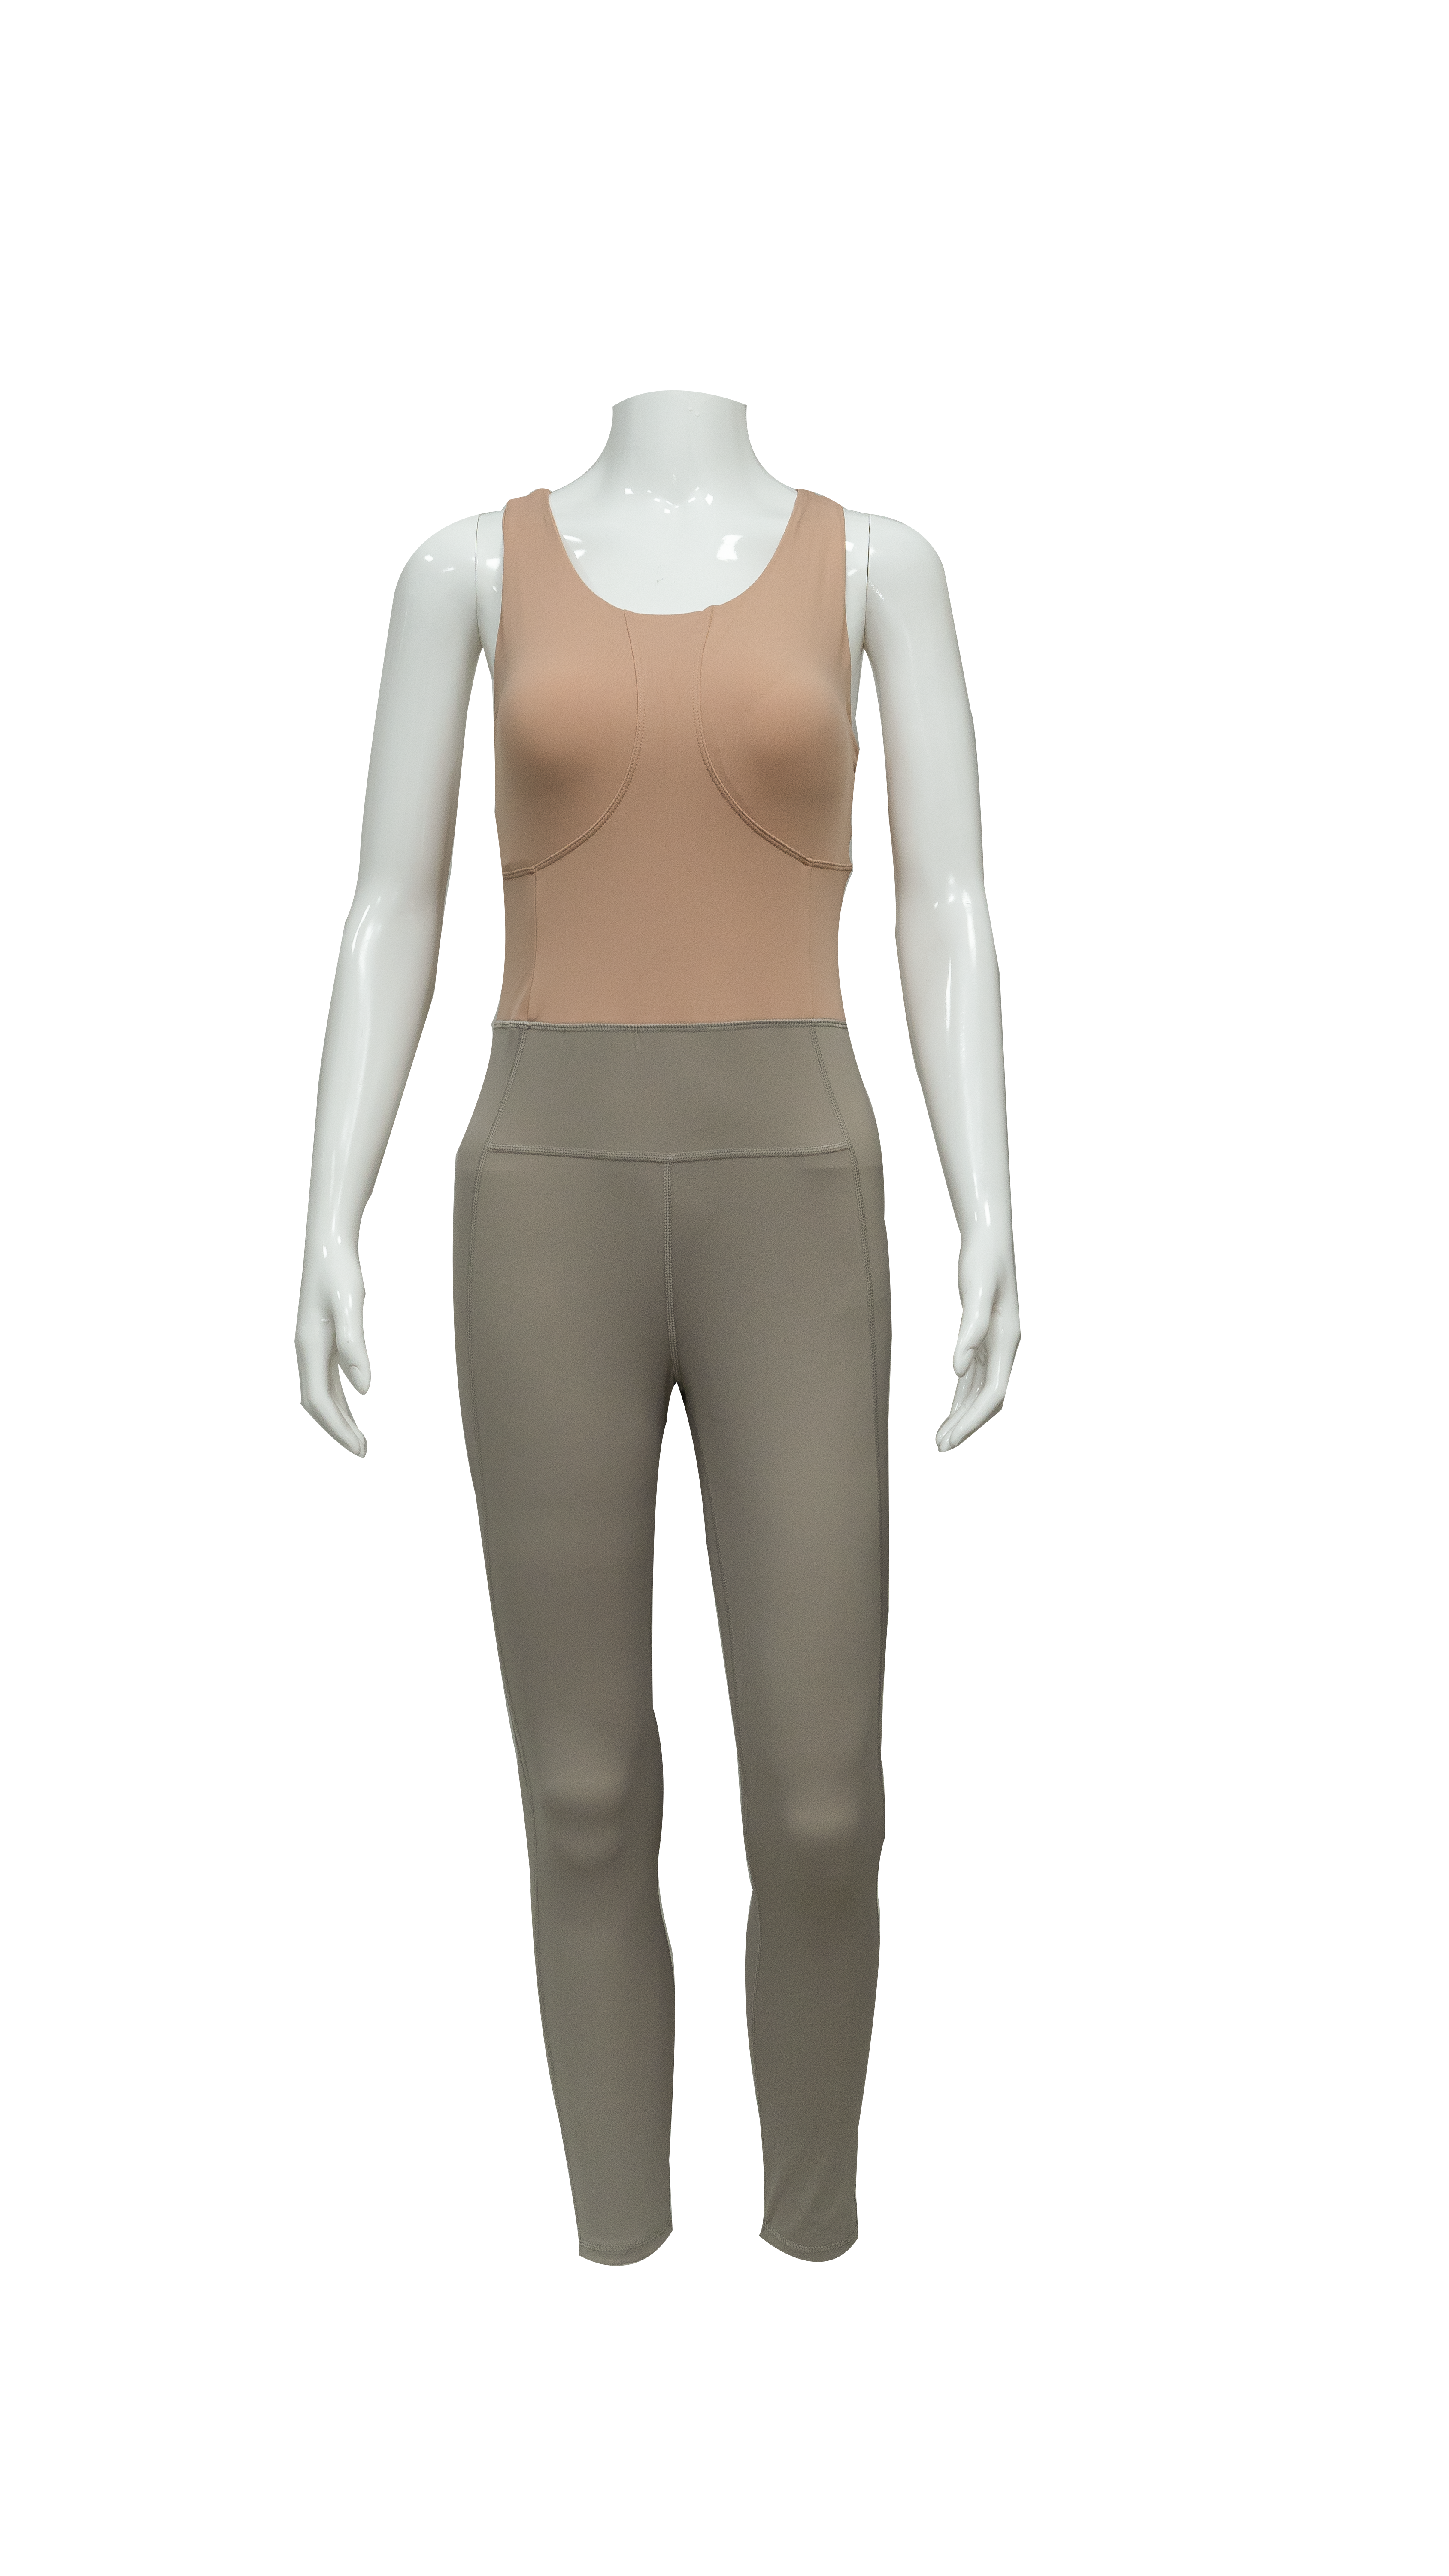 Exercise Outfit For Women – 1